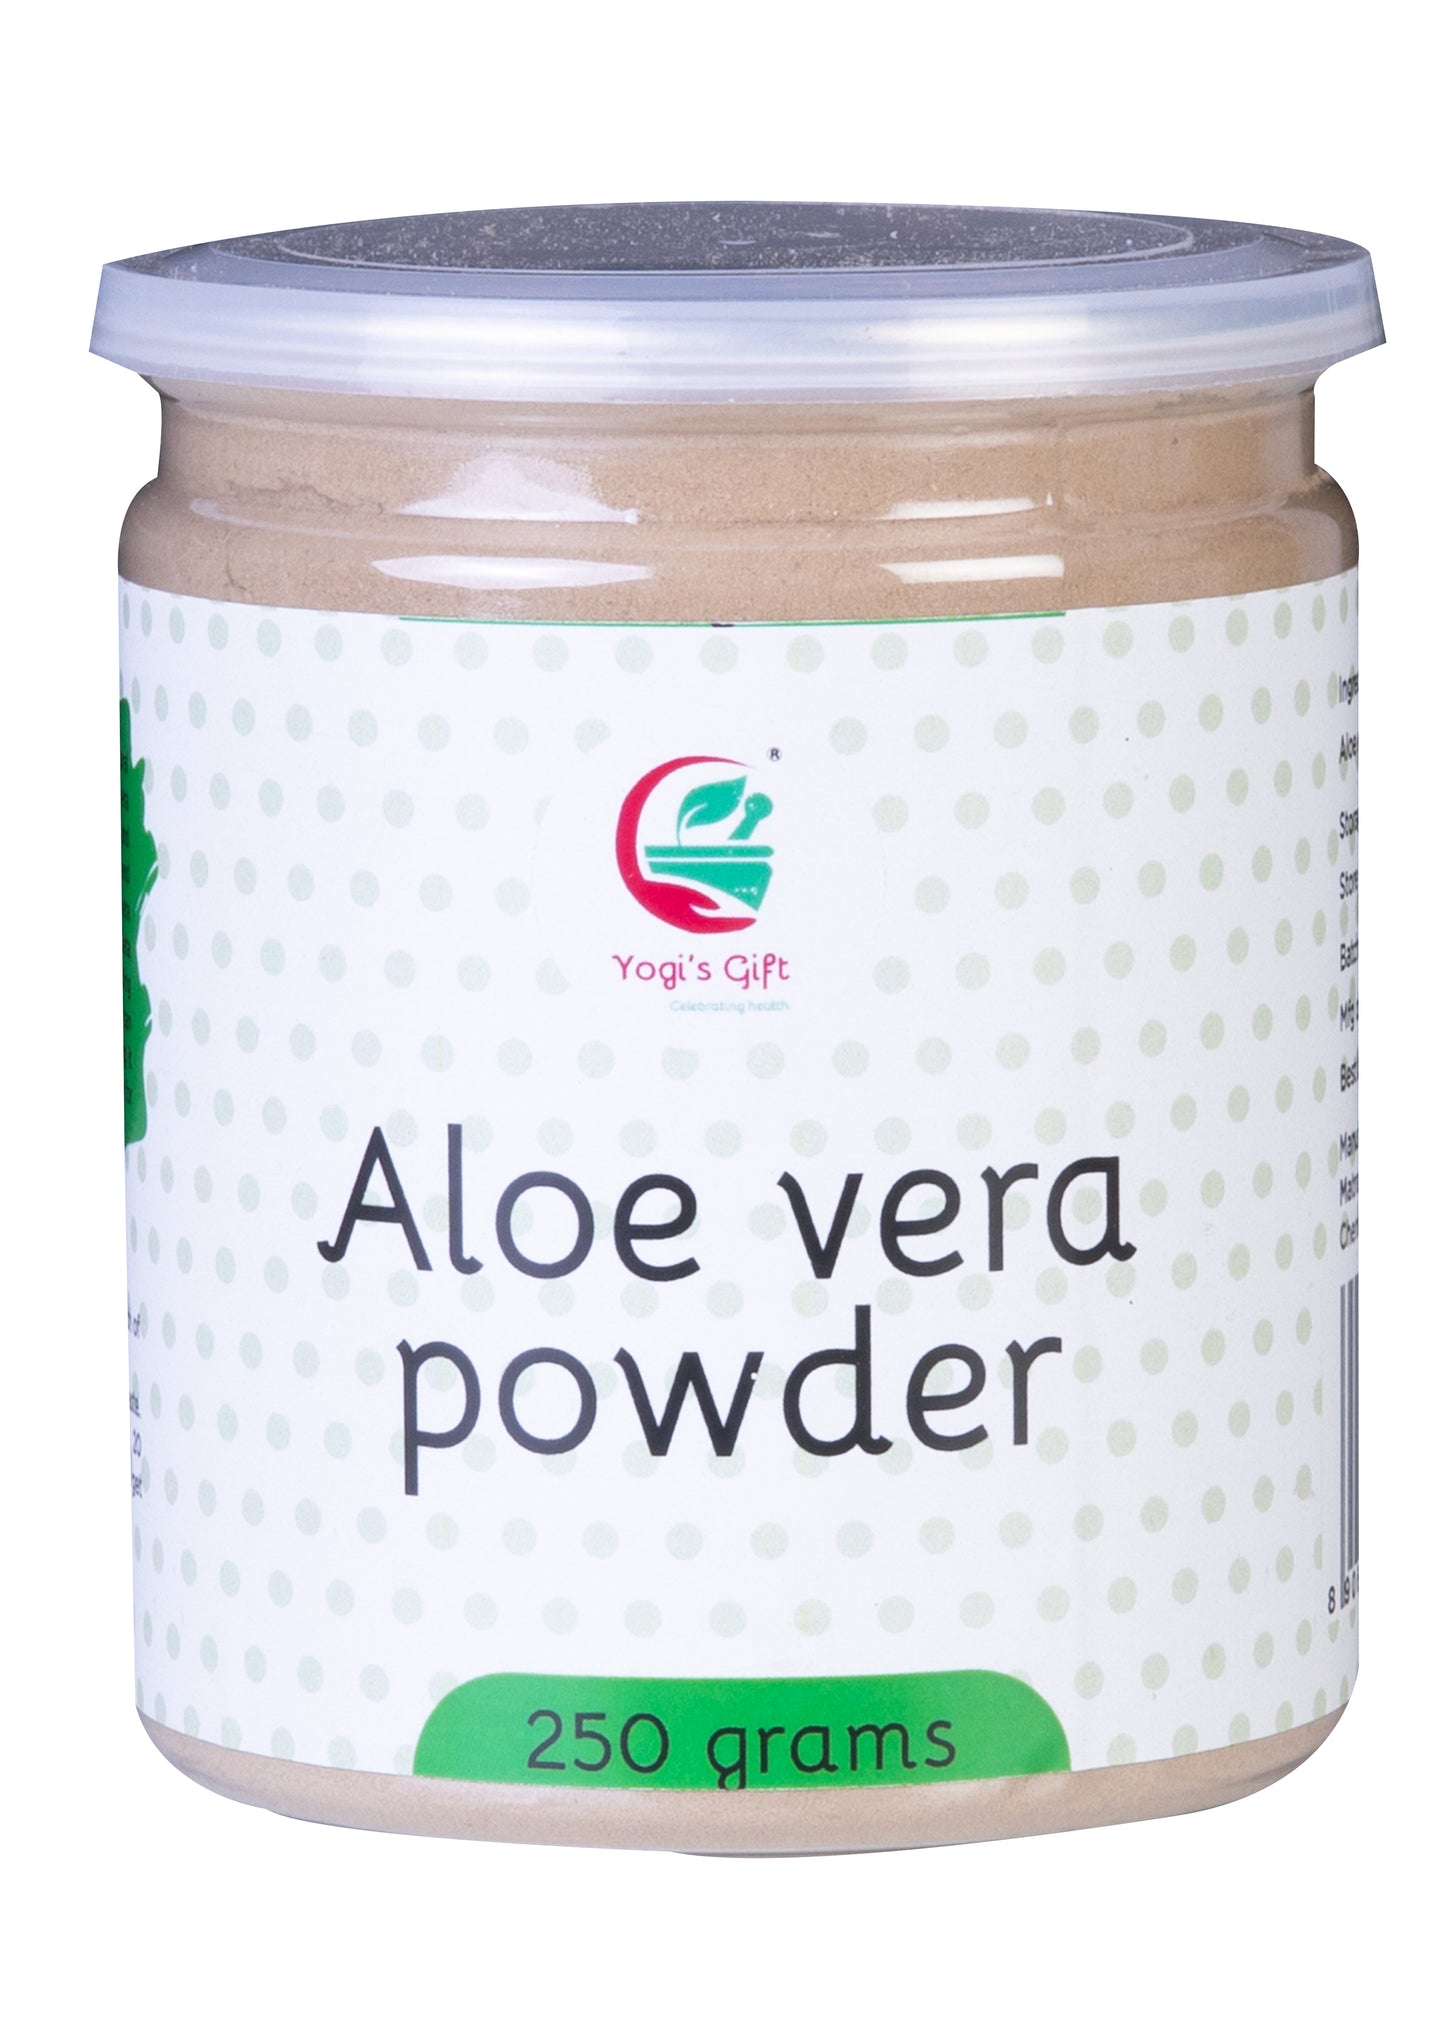 Aloe vera powder | 250 grams | Moisturizing face mask ingredient for dry skin | Hair mask ingredient for Hair growth | Made from Pure & Organically Cultivated Aloevera | by Yogi’s Gift®